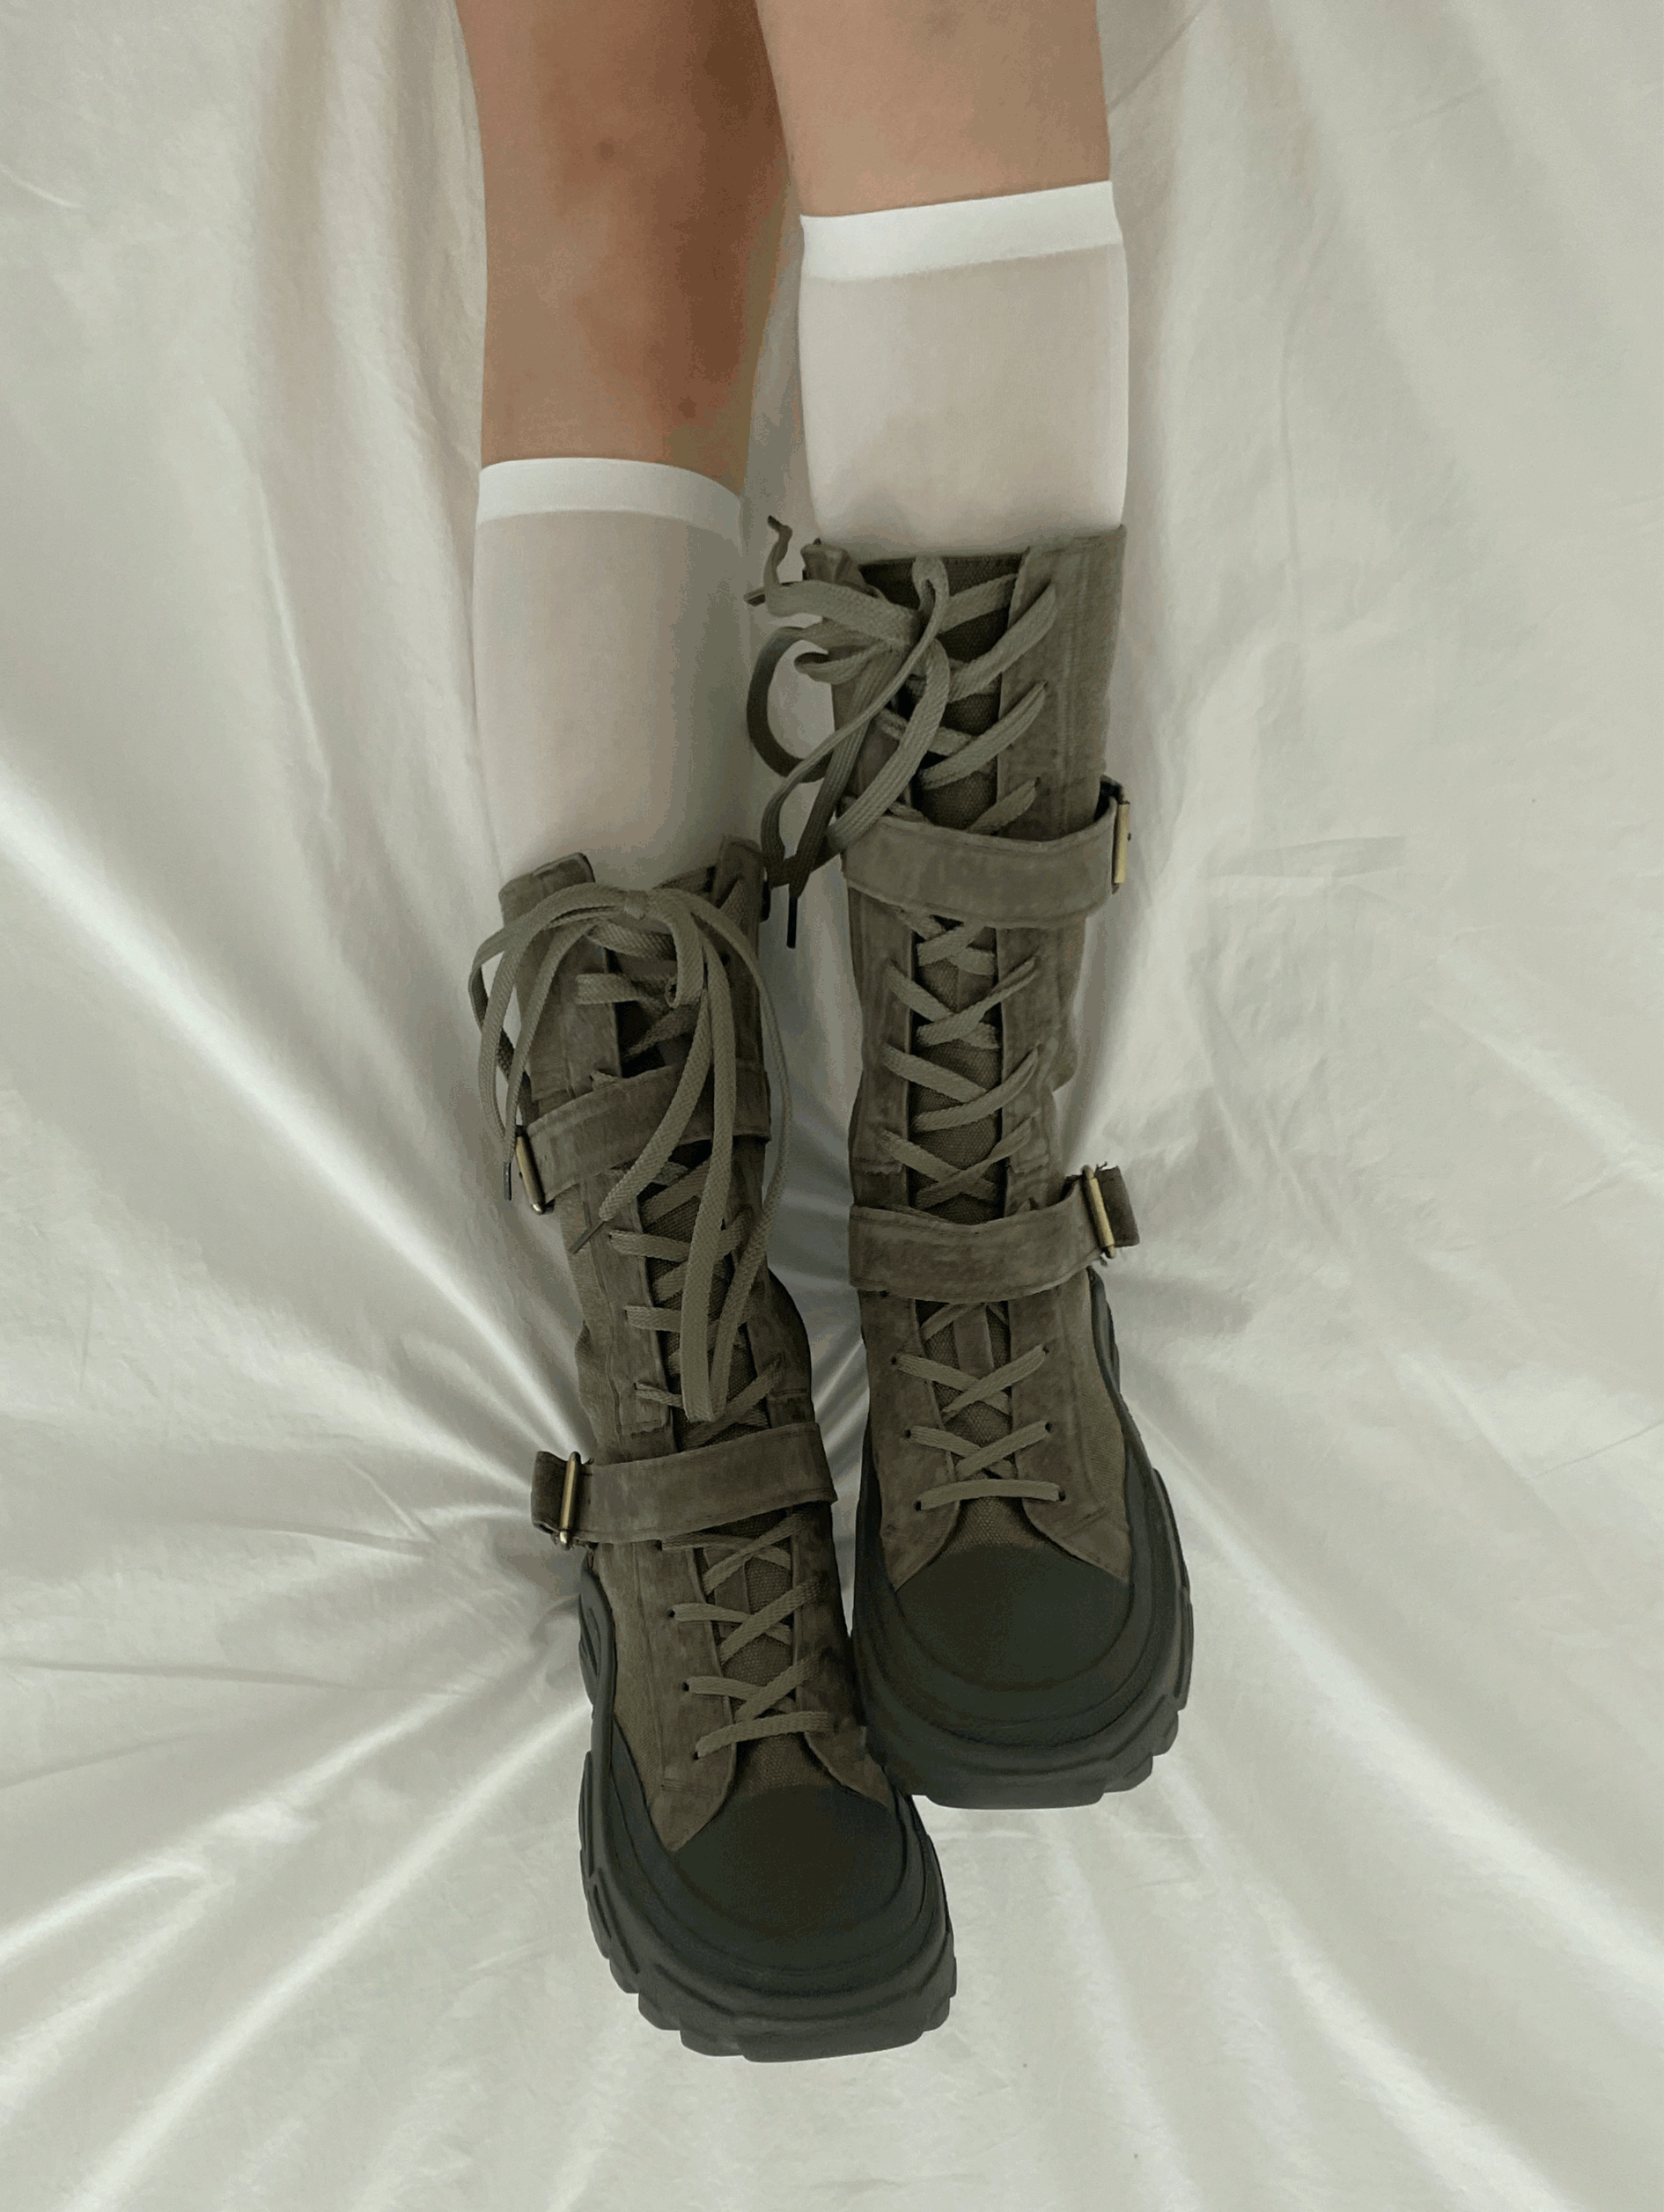 Broad canvas boots